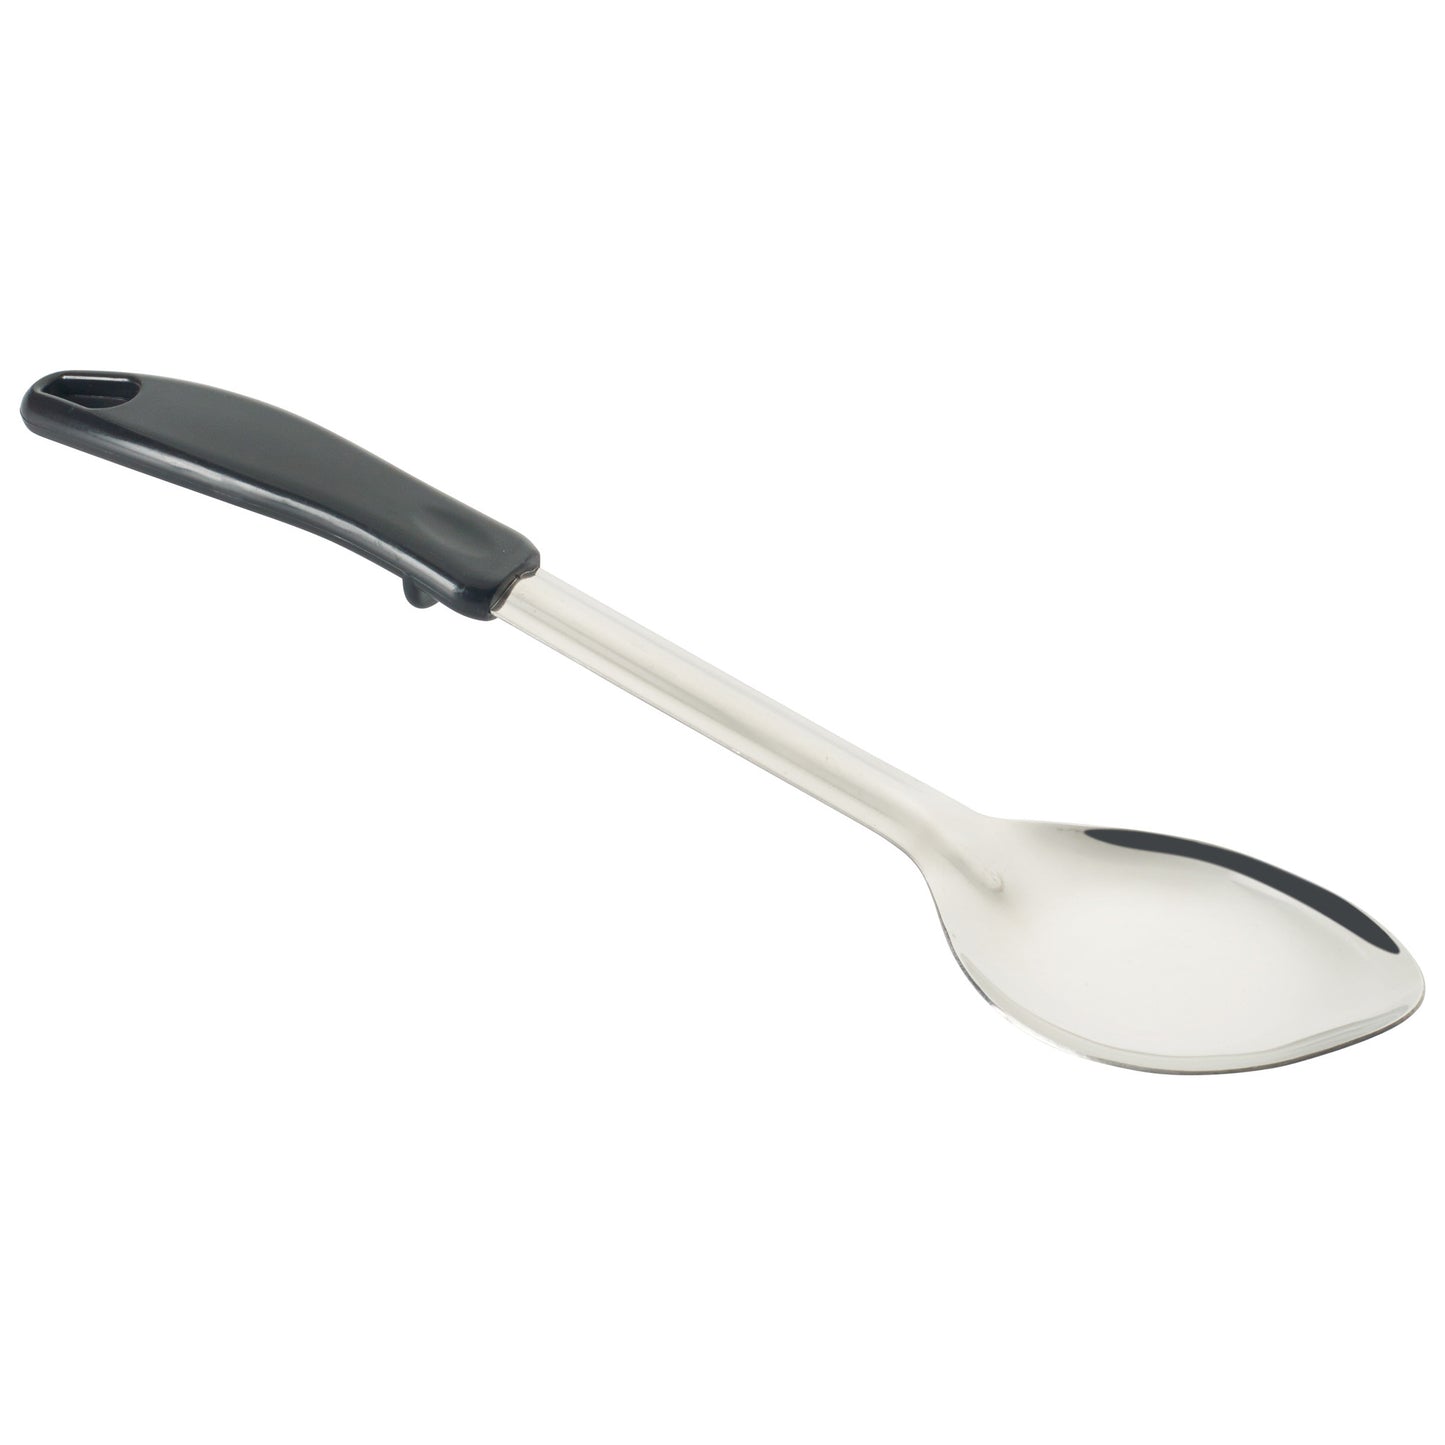 BHOP-13 - Basting Spoon with Stop-Hook Polypropylene Handle - Solid, 13"